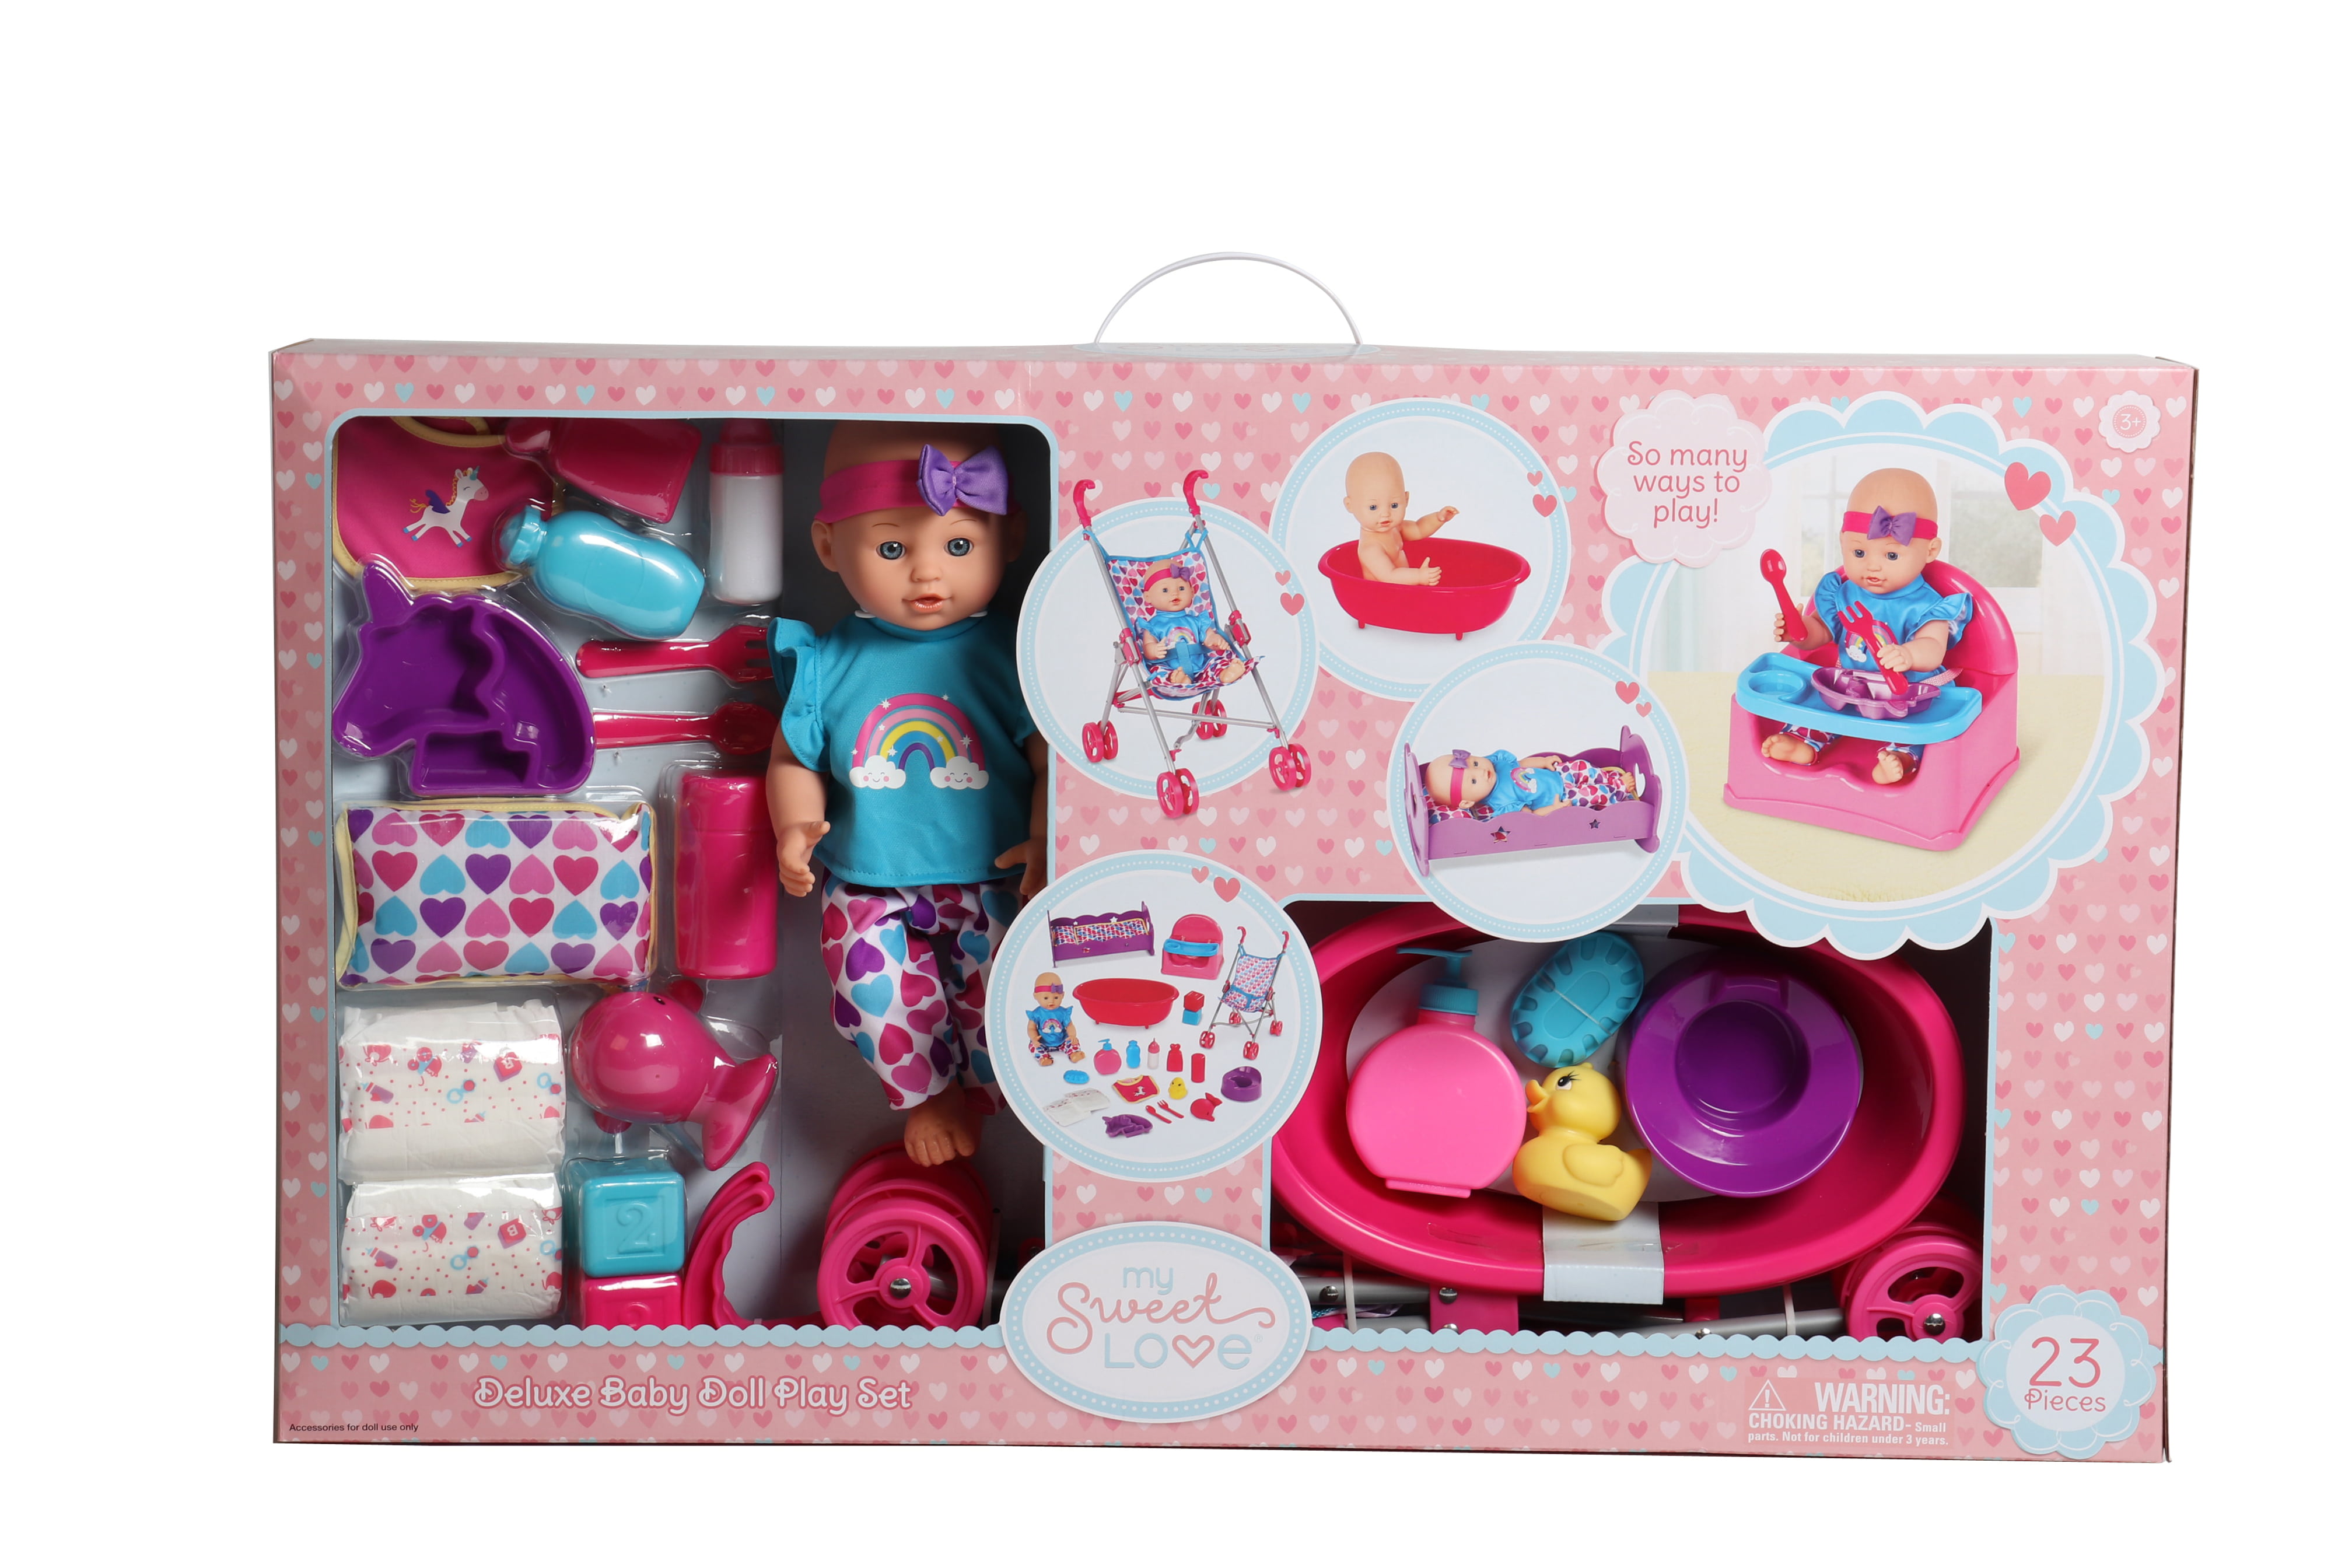 be my baby deluxe playset